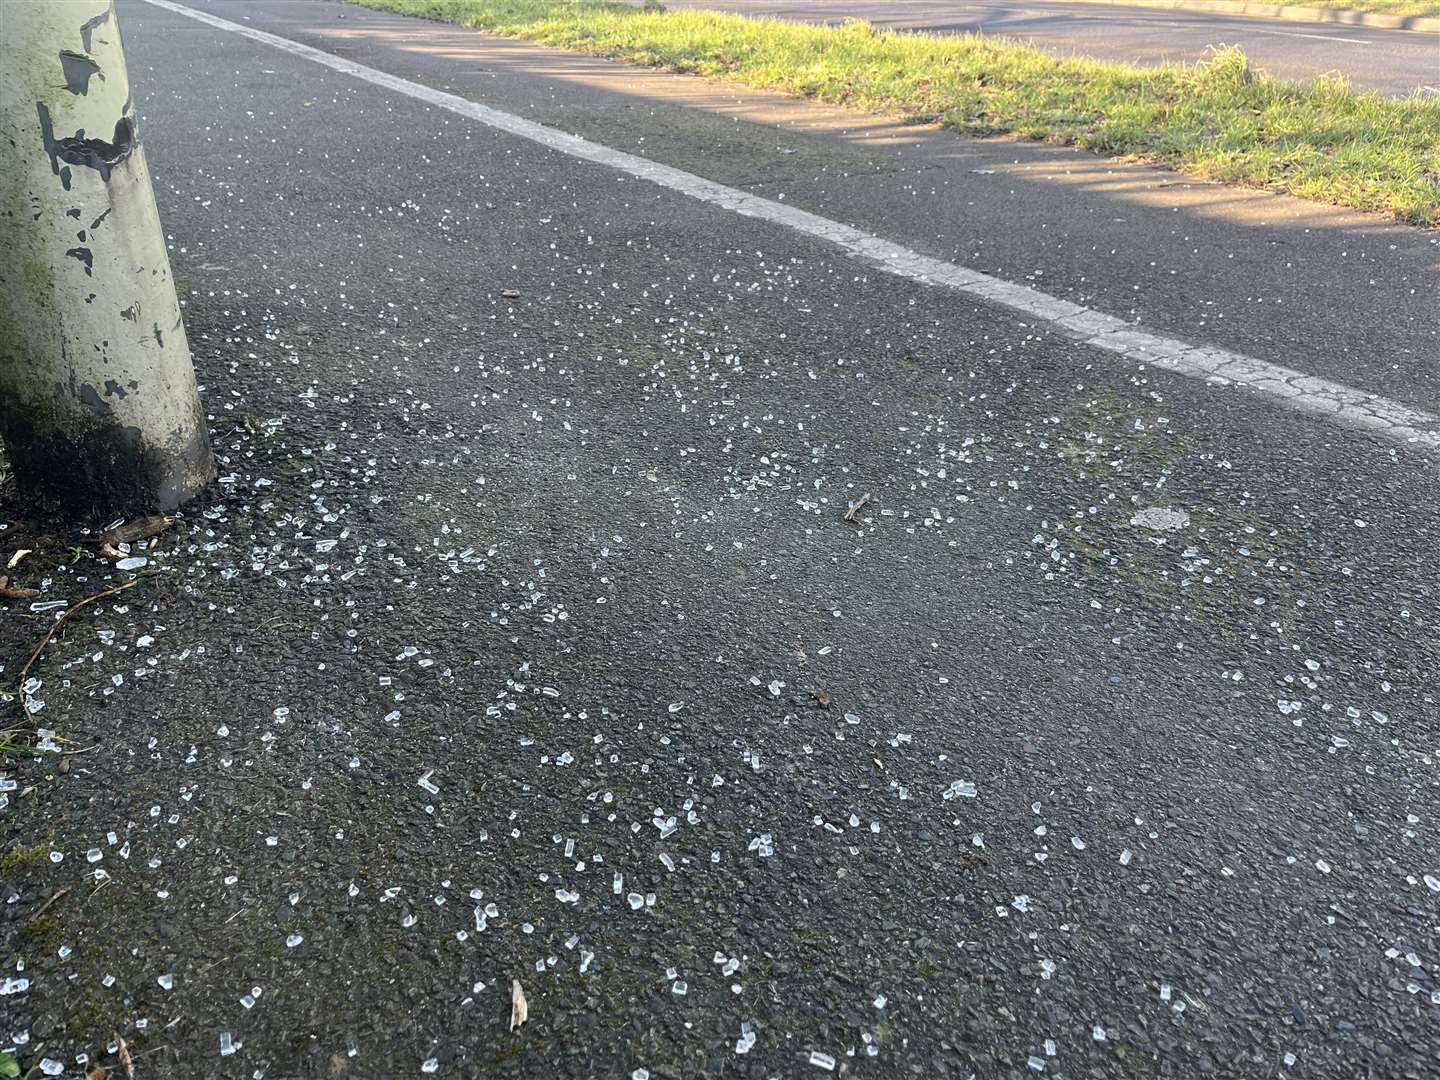 Four street lamps in Kennington, Ashford, have been smashed leaving glass shards scattered on the pavement